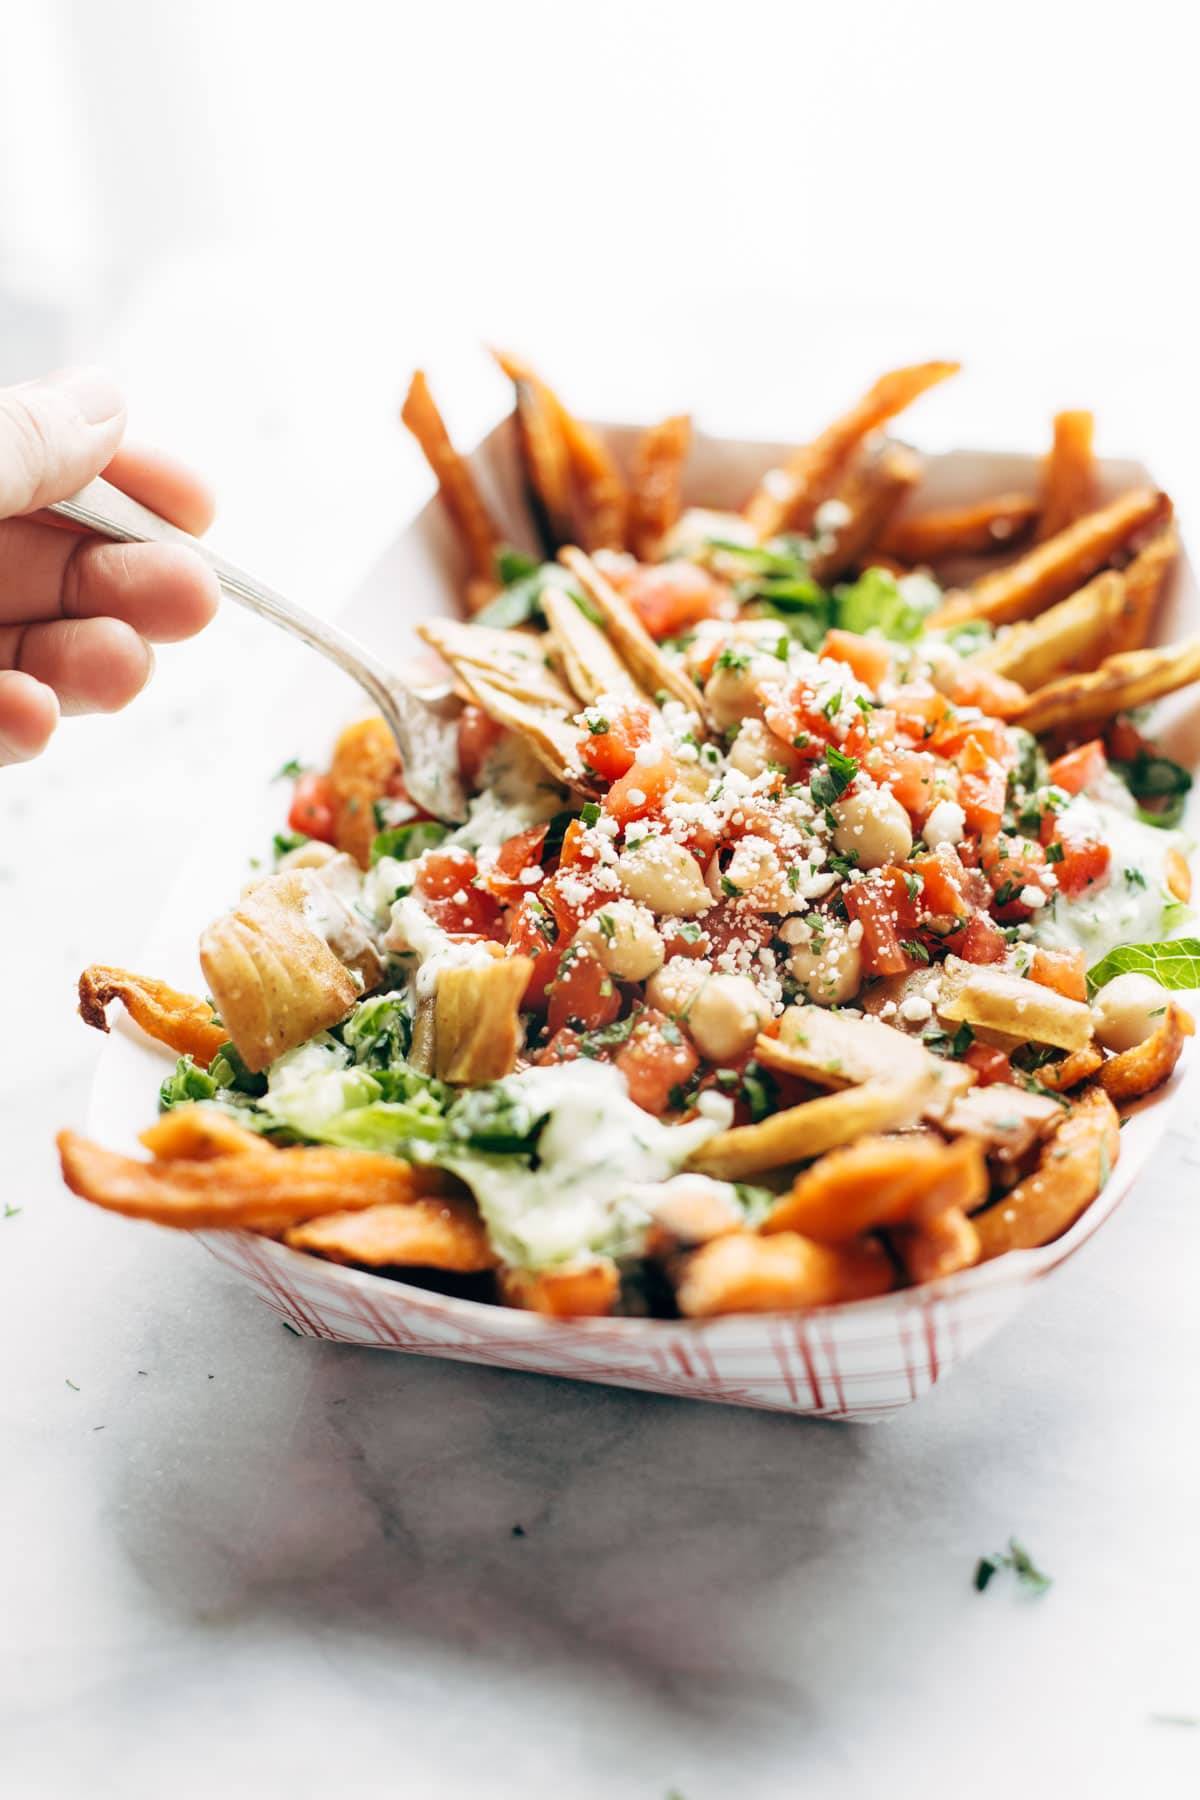 Loaded Mediterranean Street Cart Fries: sweet potato fries topped with fresh romaine, tzatziki, marinated tomatoes and chickpeas, feta cheese, and more. Meatless and mind-blowing, all in one. | pinchofyum.com